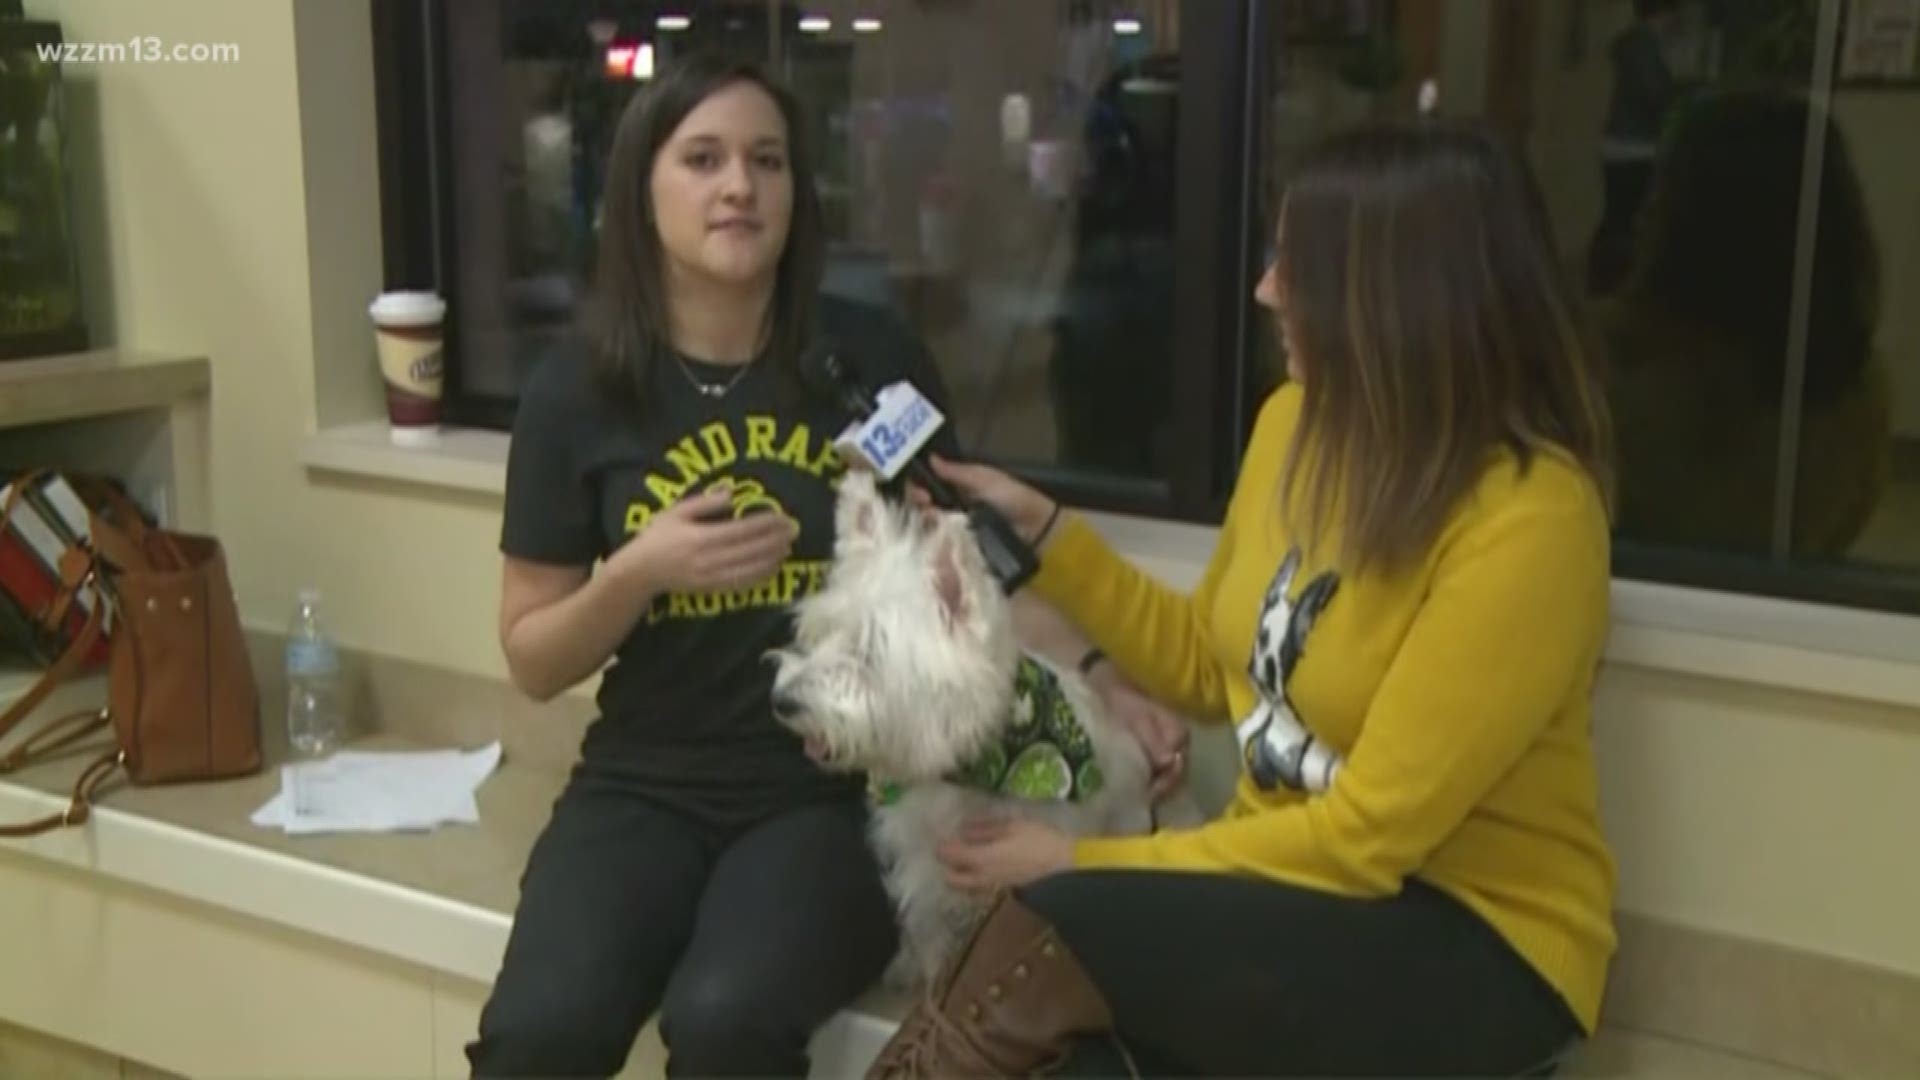 During LaughFest, there's event specifically for dog lovers.